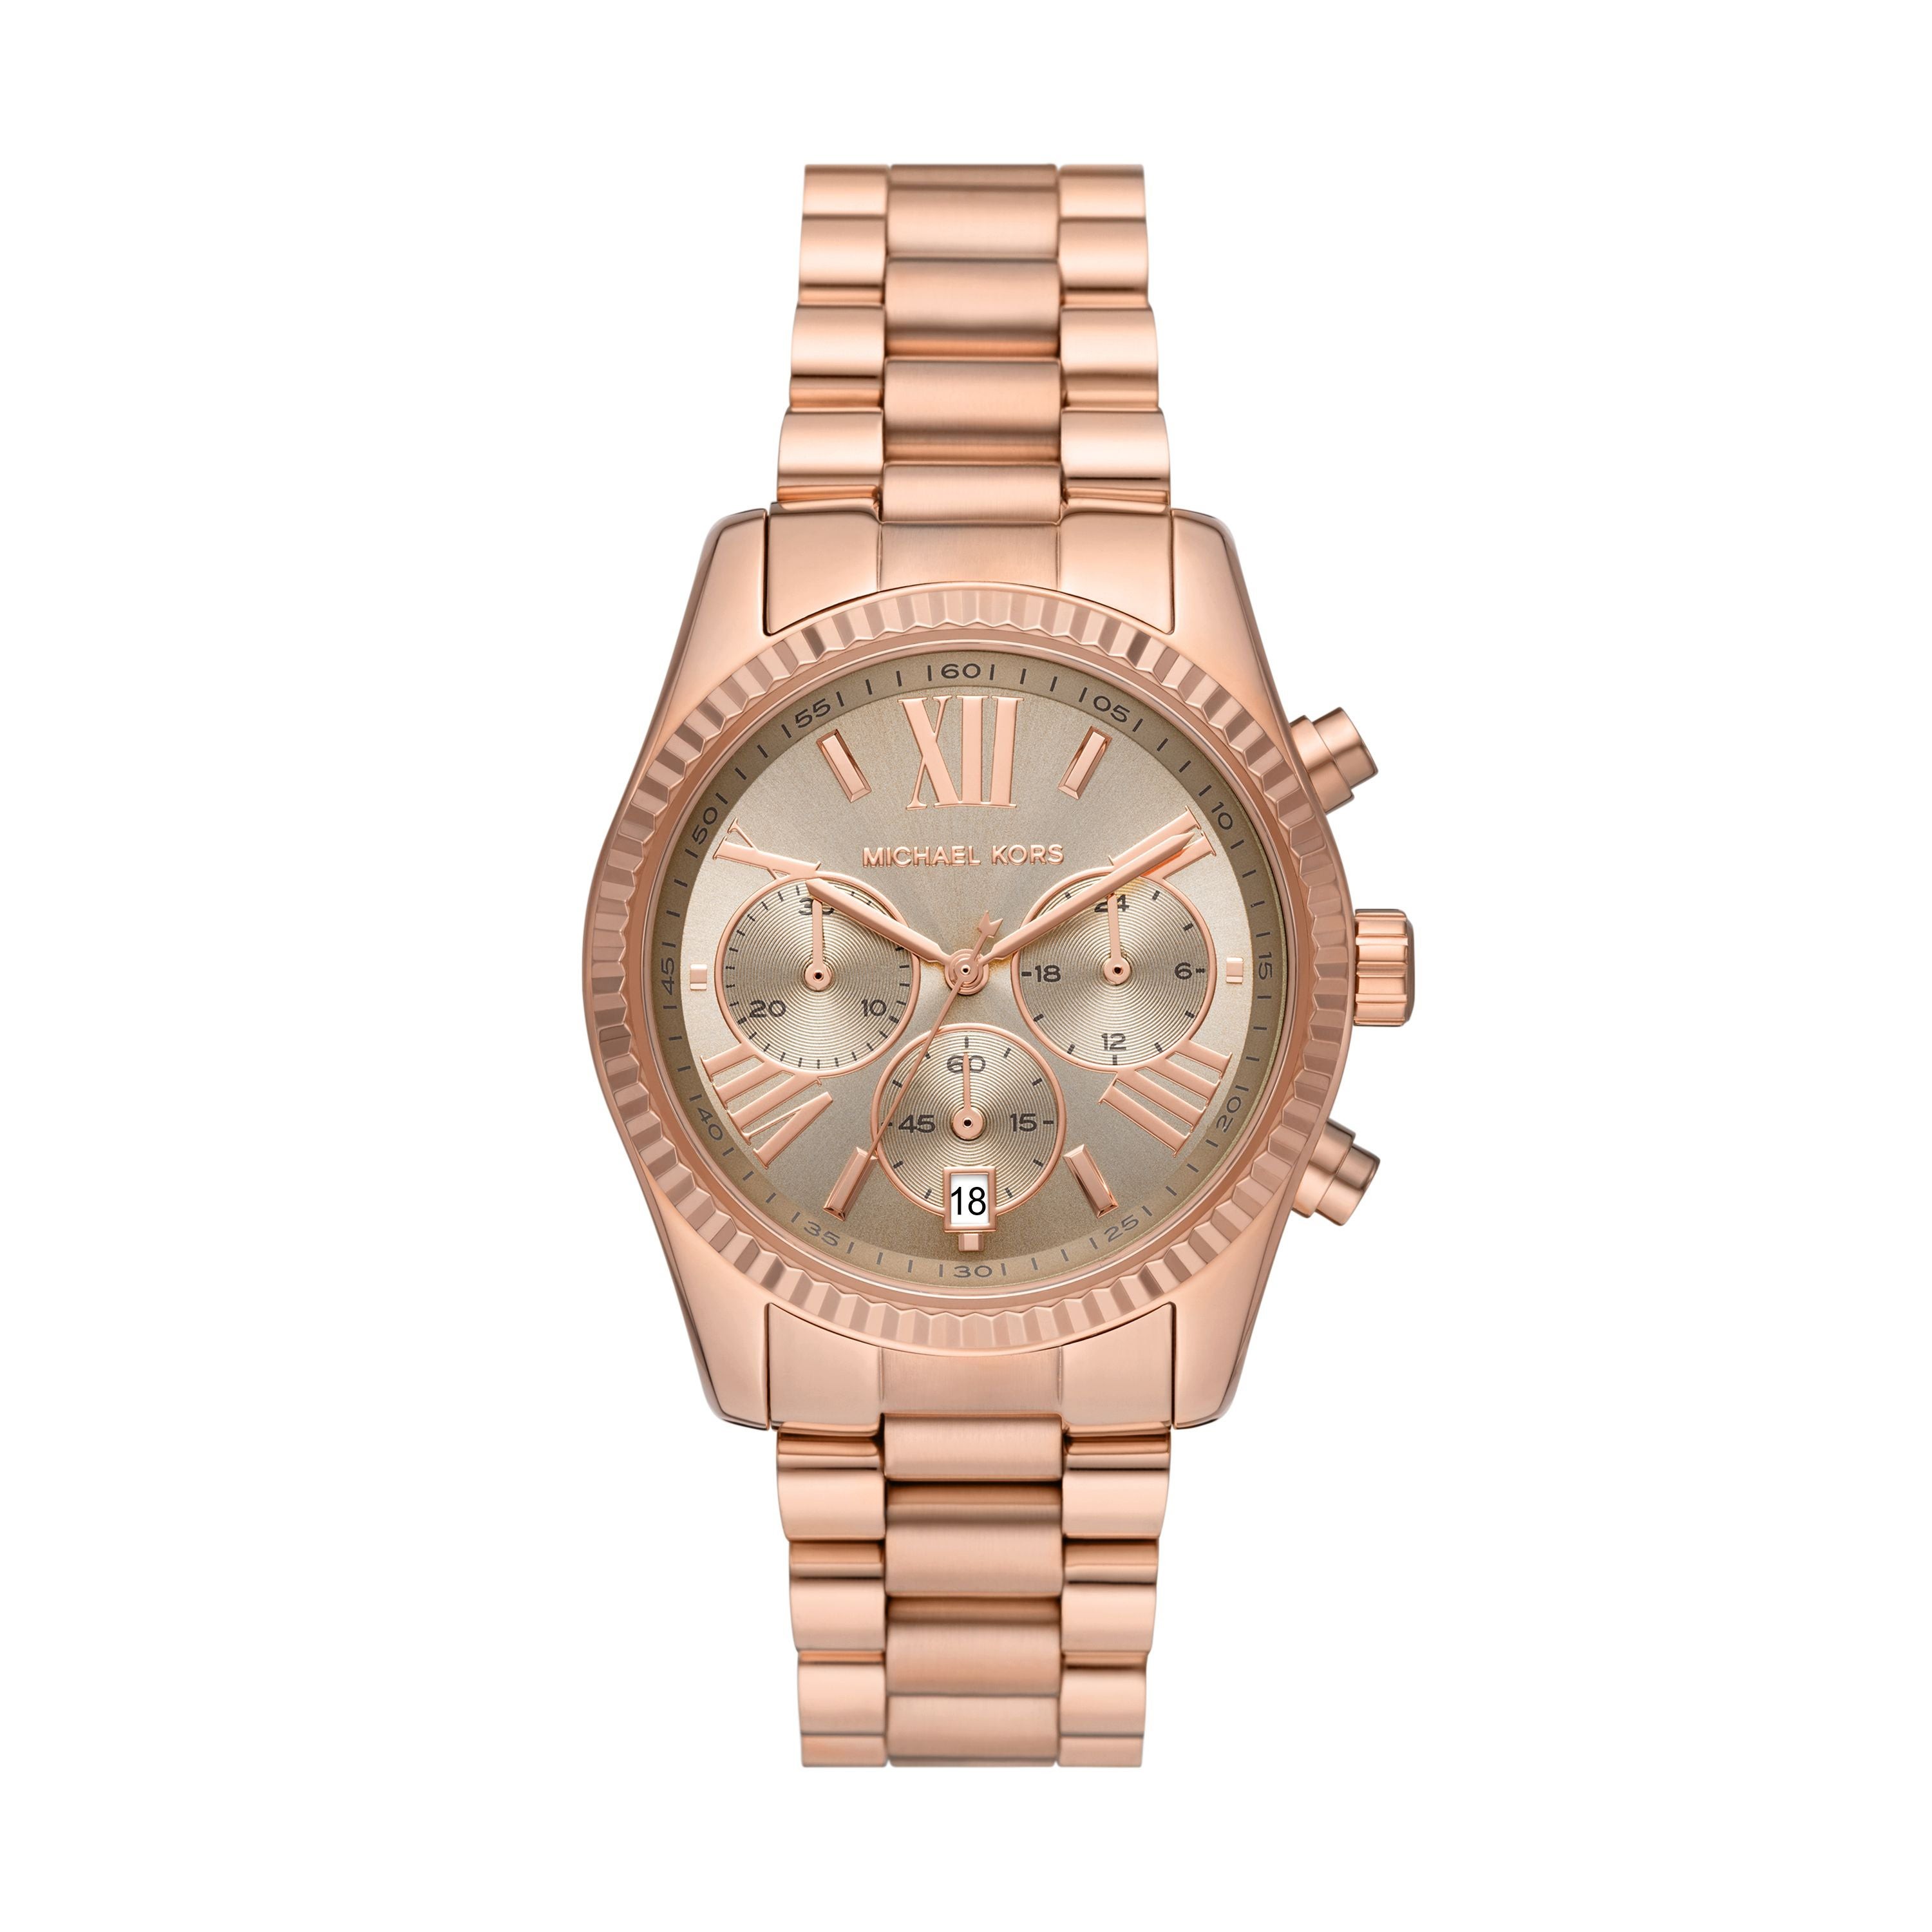 Ladies Lexington Rose Gold-Tone Stainless Steel Watch Gray Dial